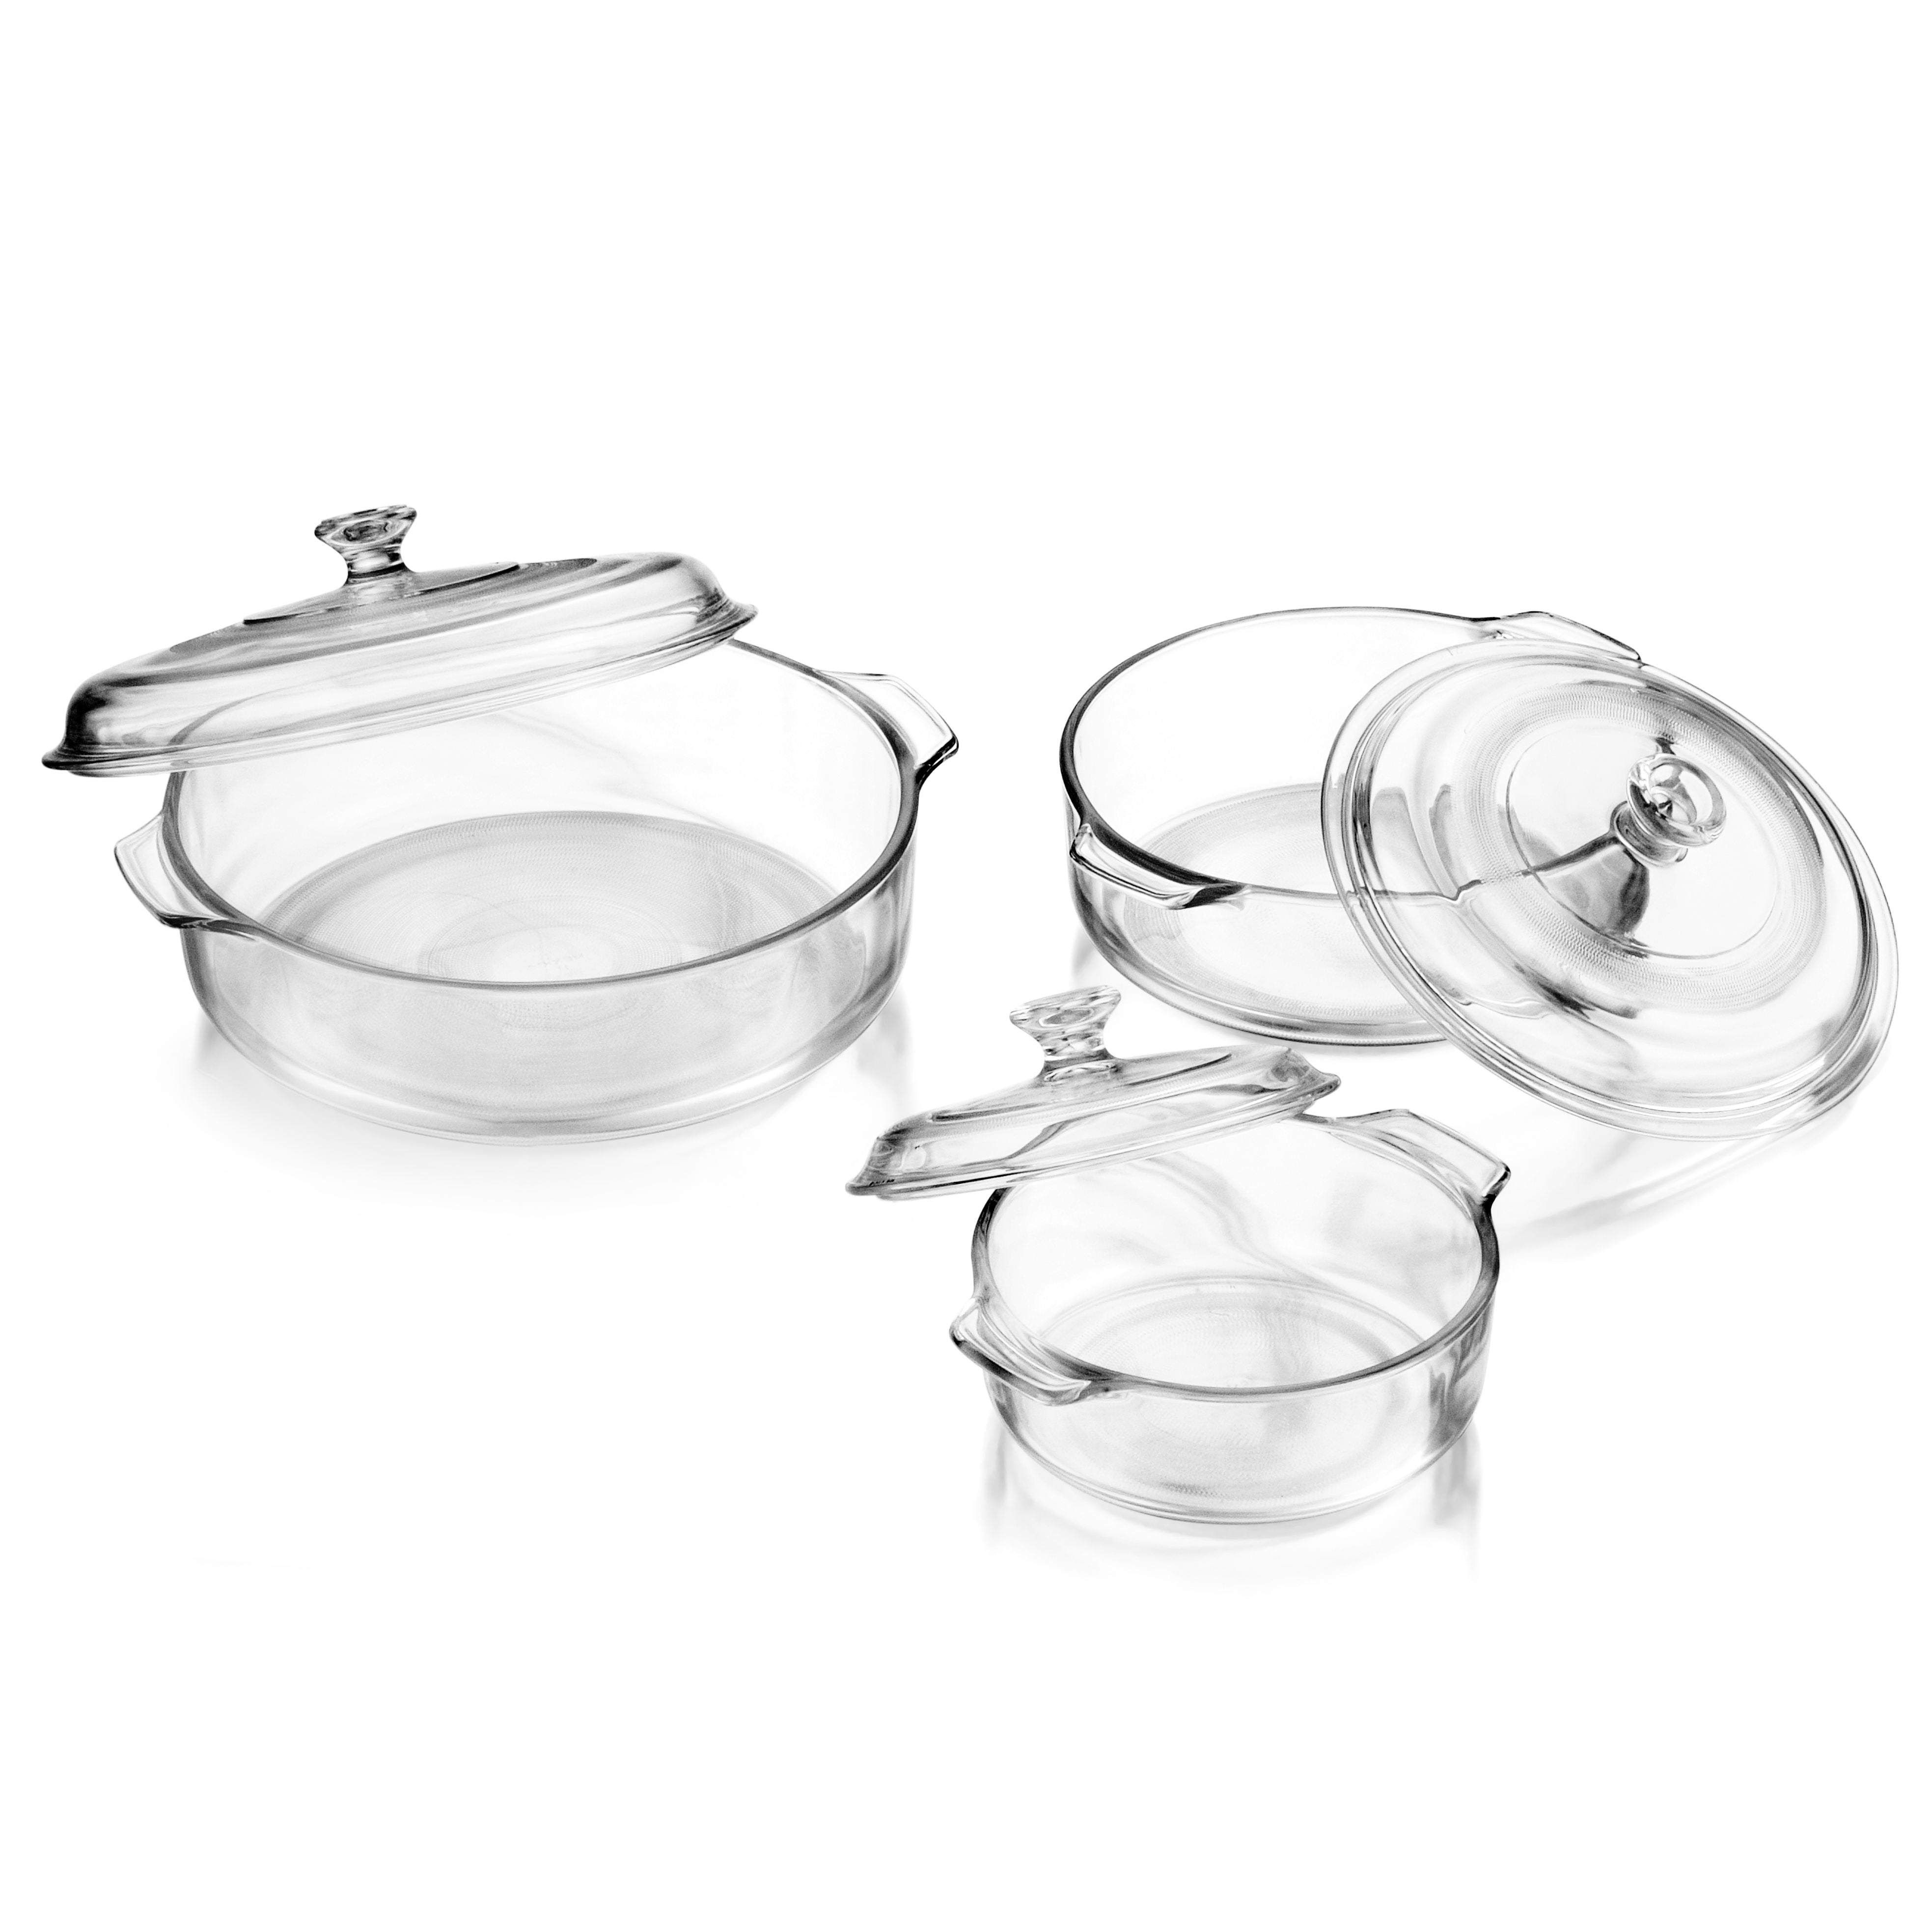 Libbey Baker's Basics Clear Glass Mixing Bowl with Lid (Set of 3